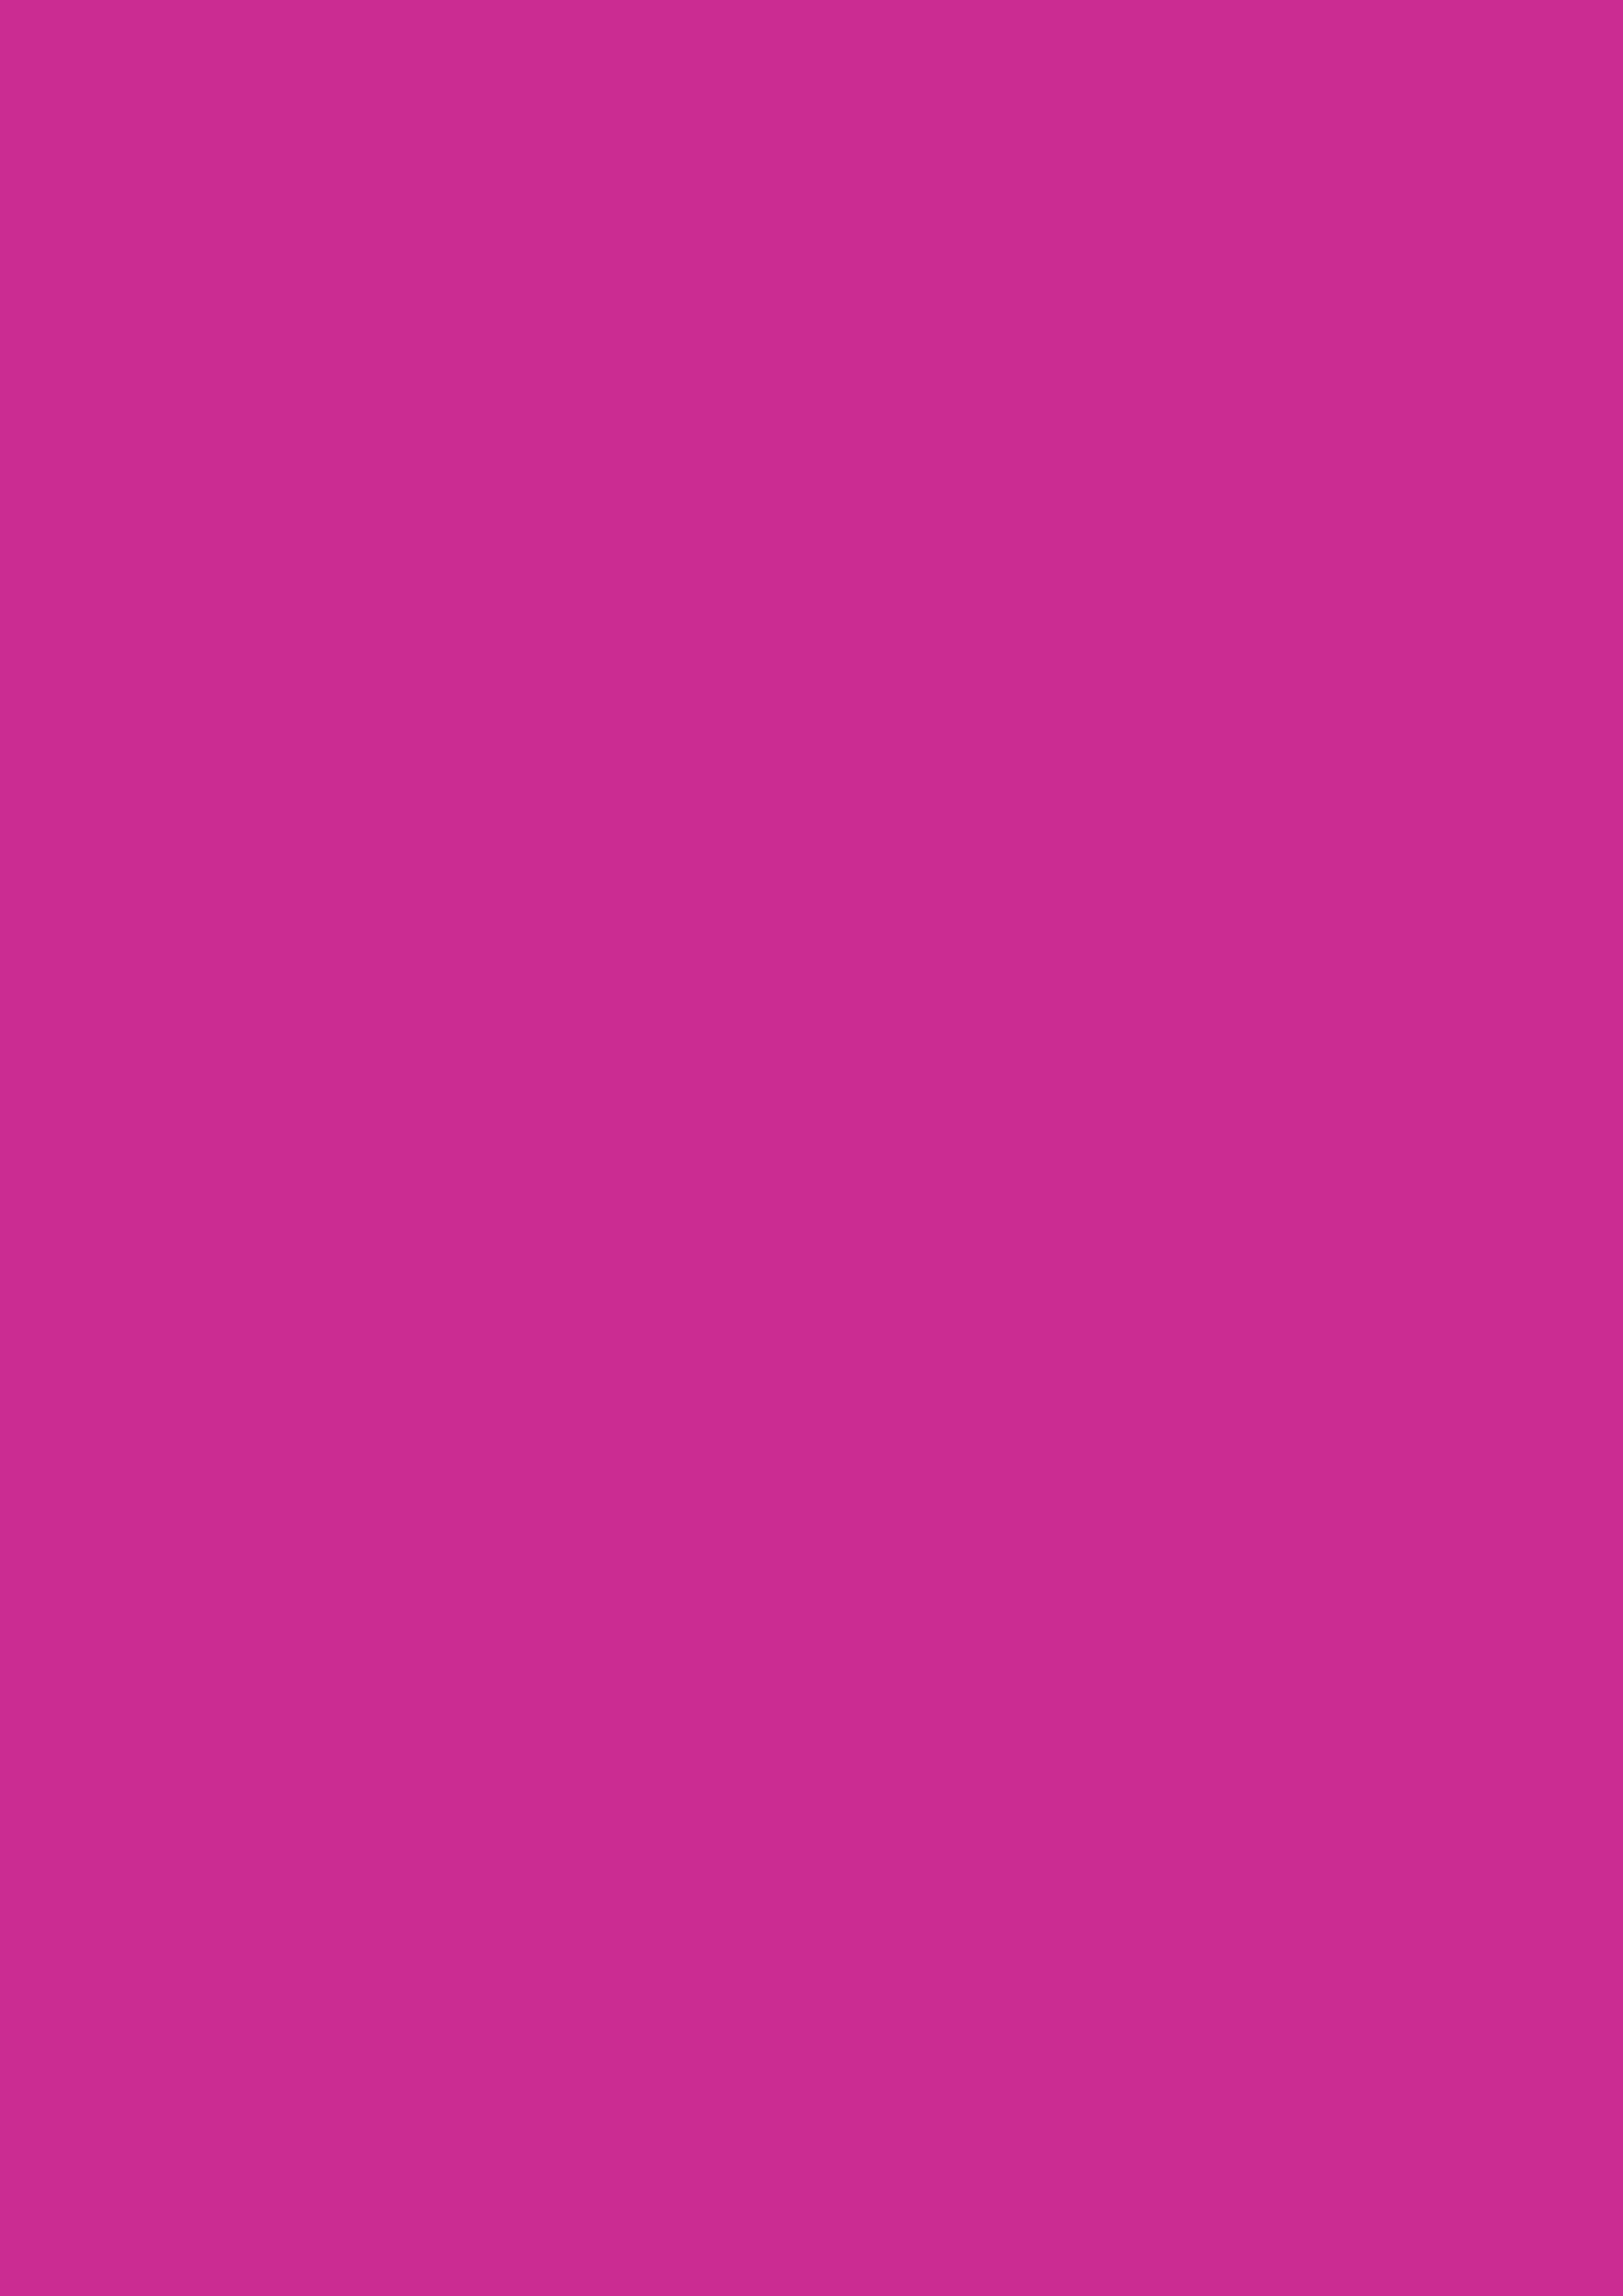 2480x3508 Royal Fuchsia Solid Color Background